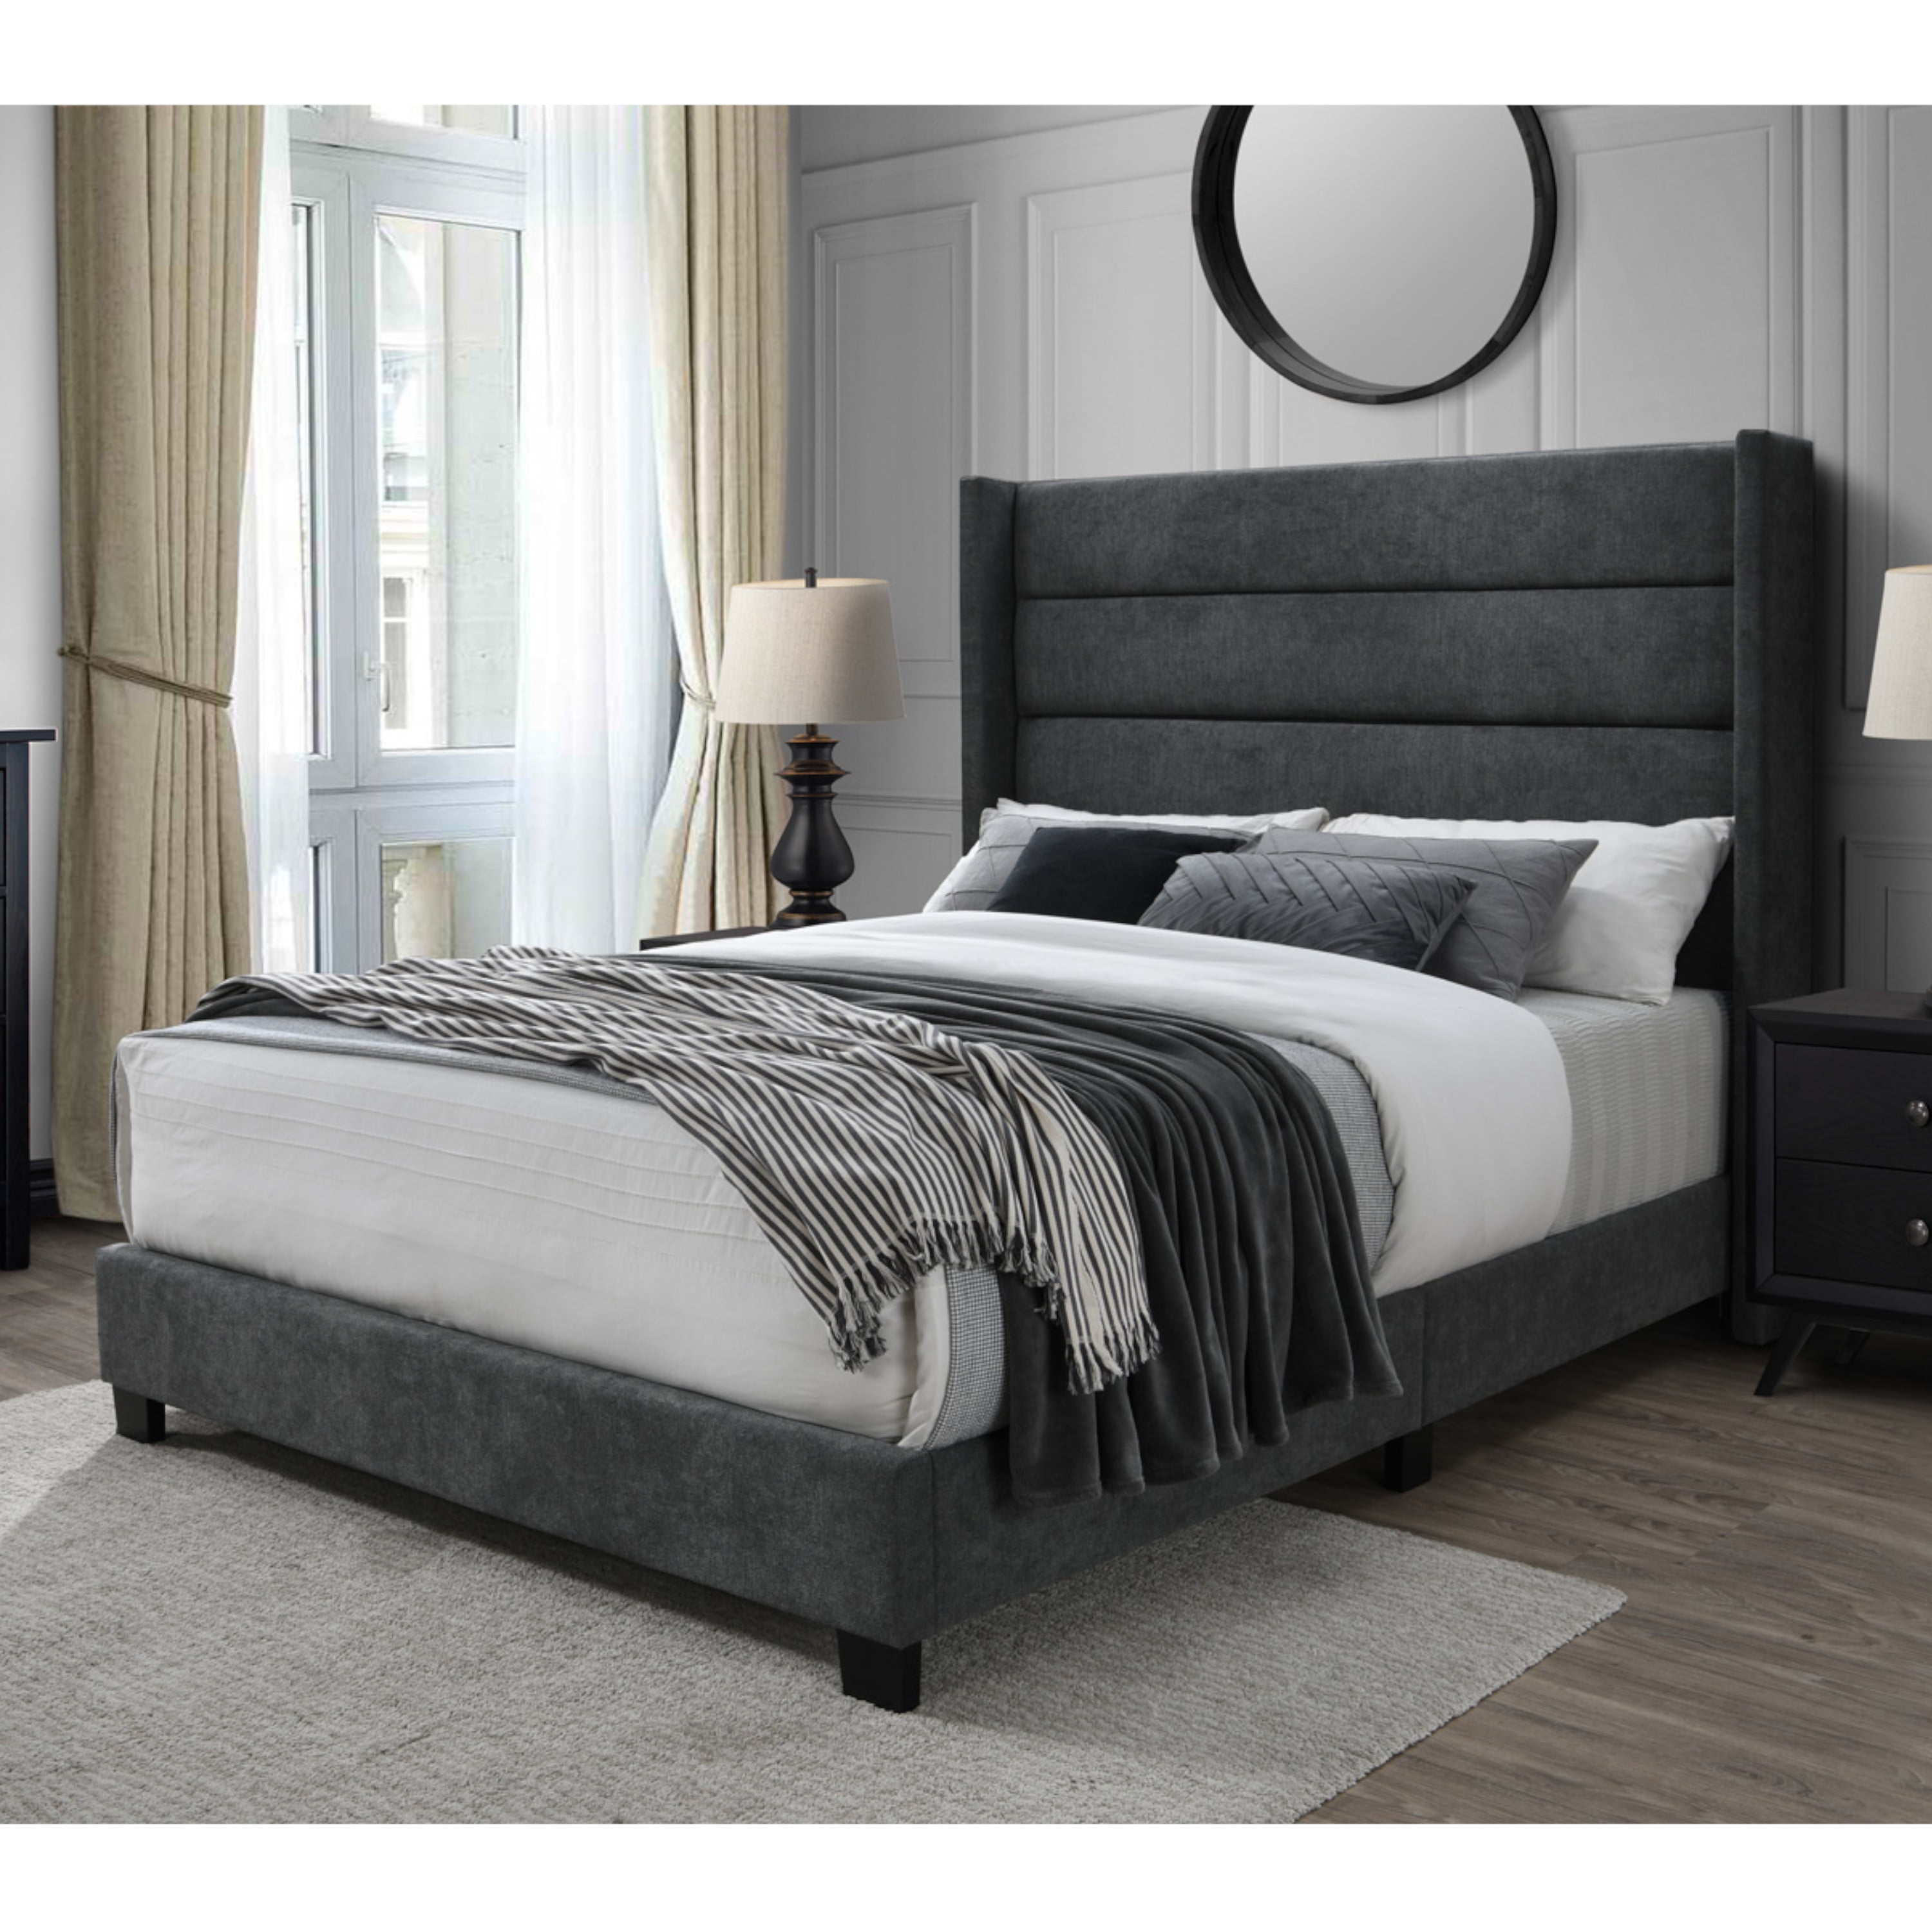 Dg Casa George Tufted Upholstered Panel, Upholstered King Bed With Tall Headboard